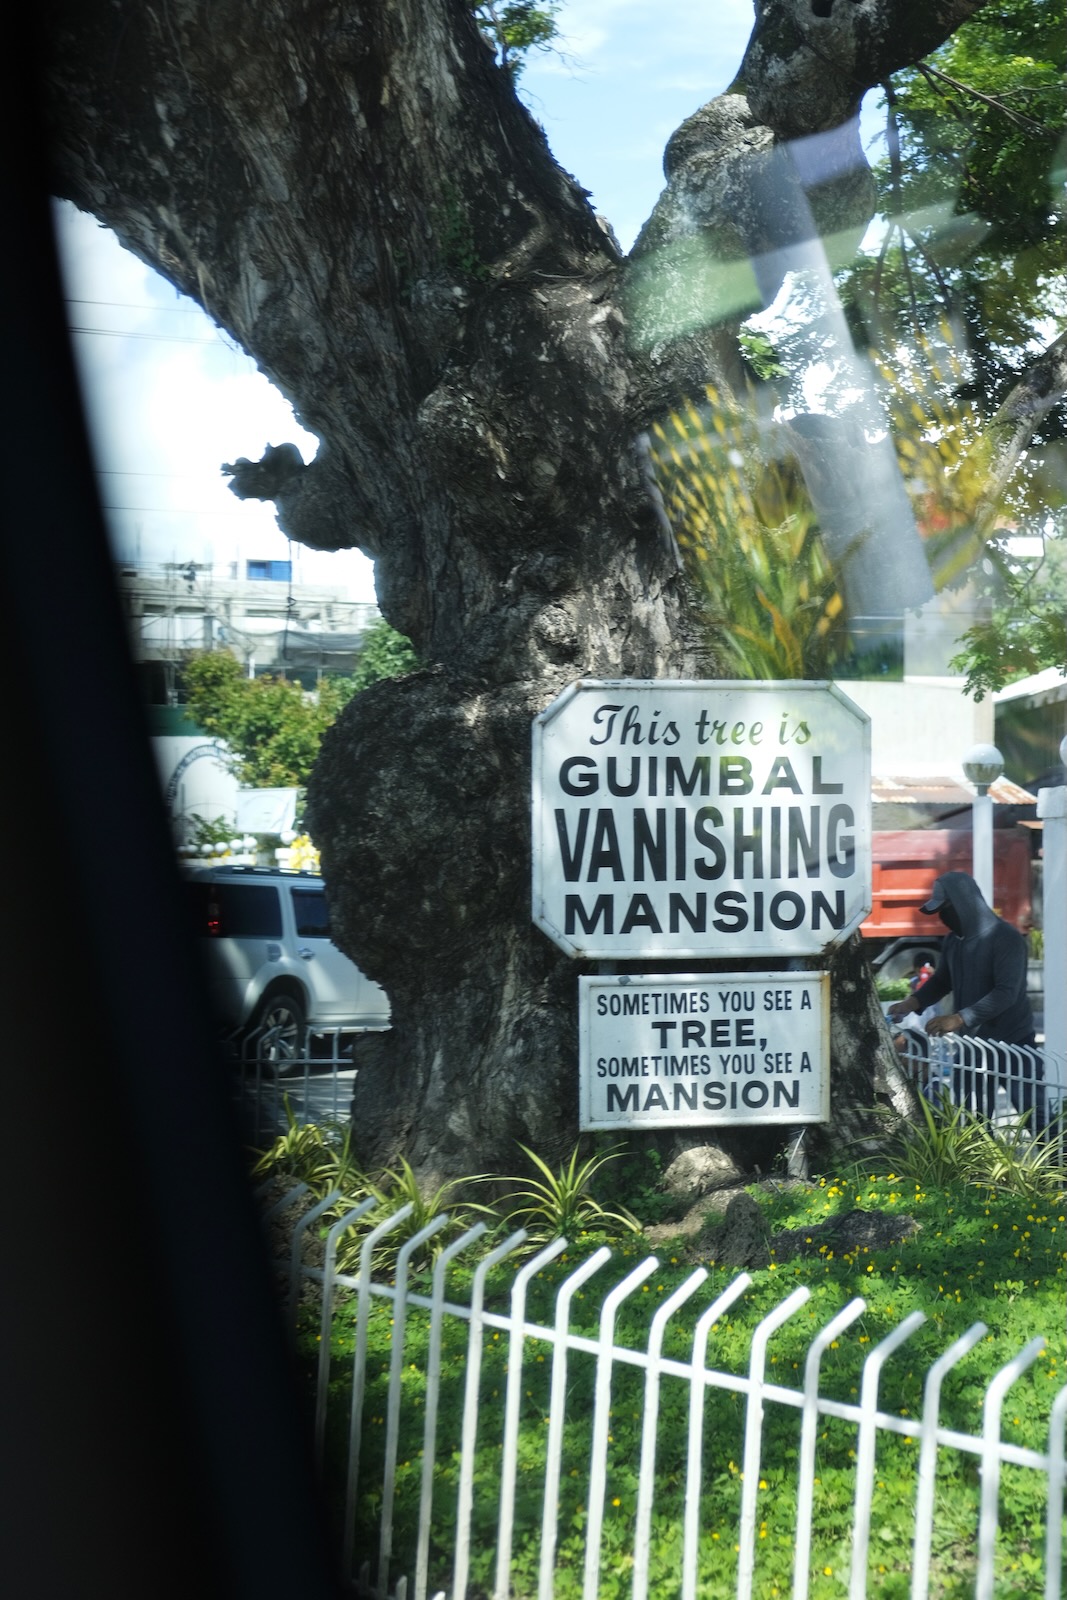 A sign in front of a large tree, marking the spot of Guimbal Vanishing Mansion.